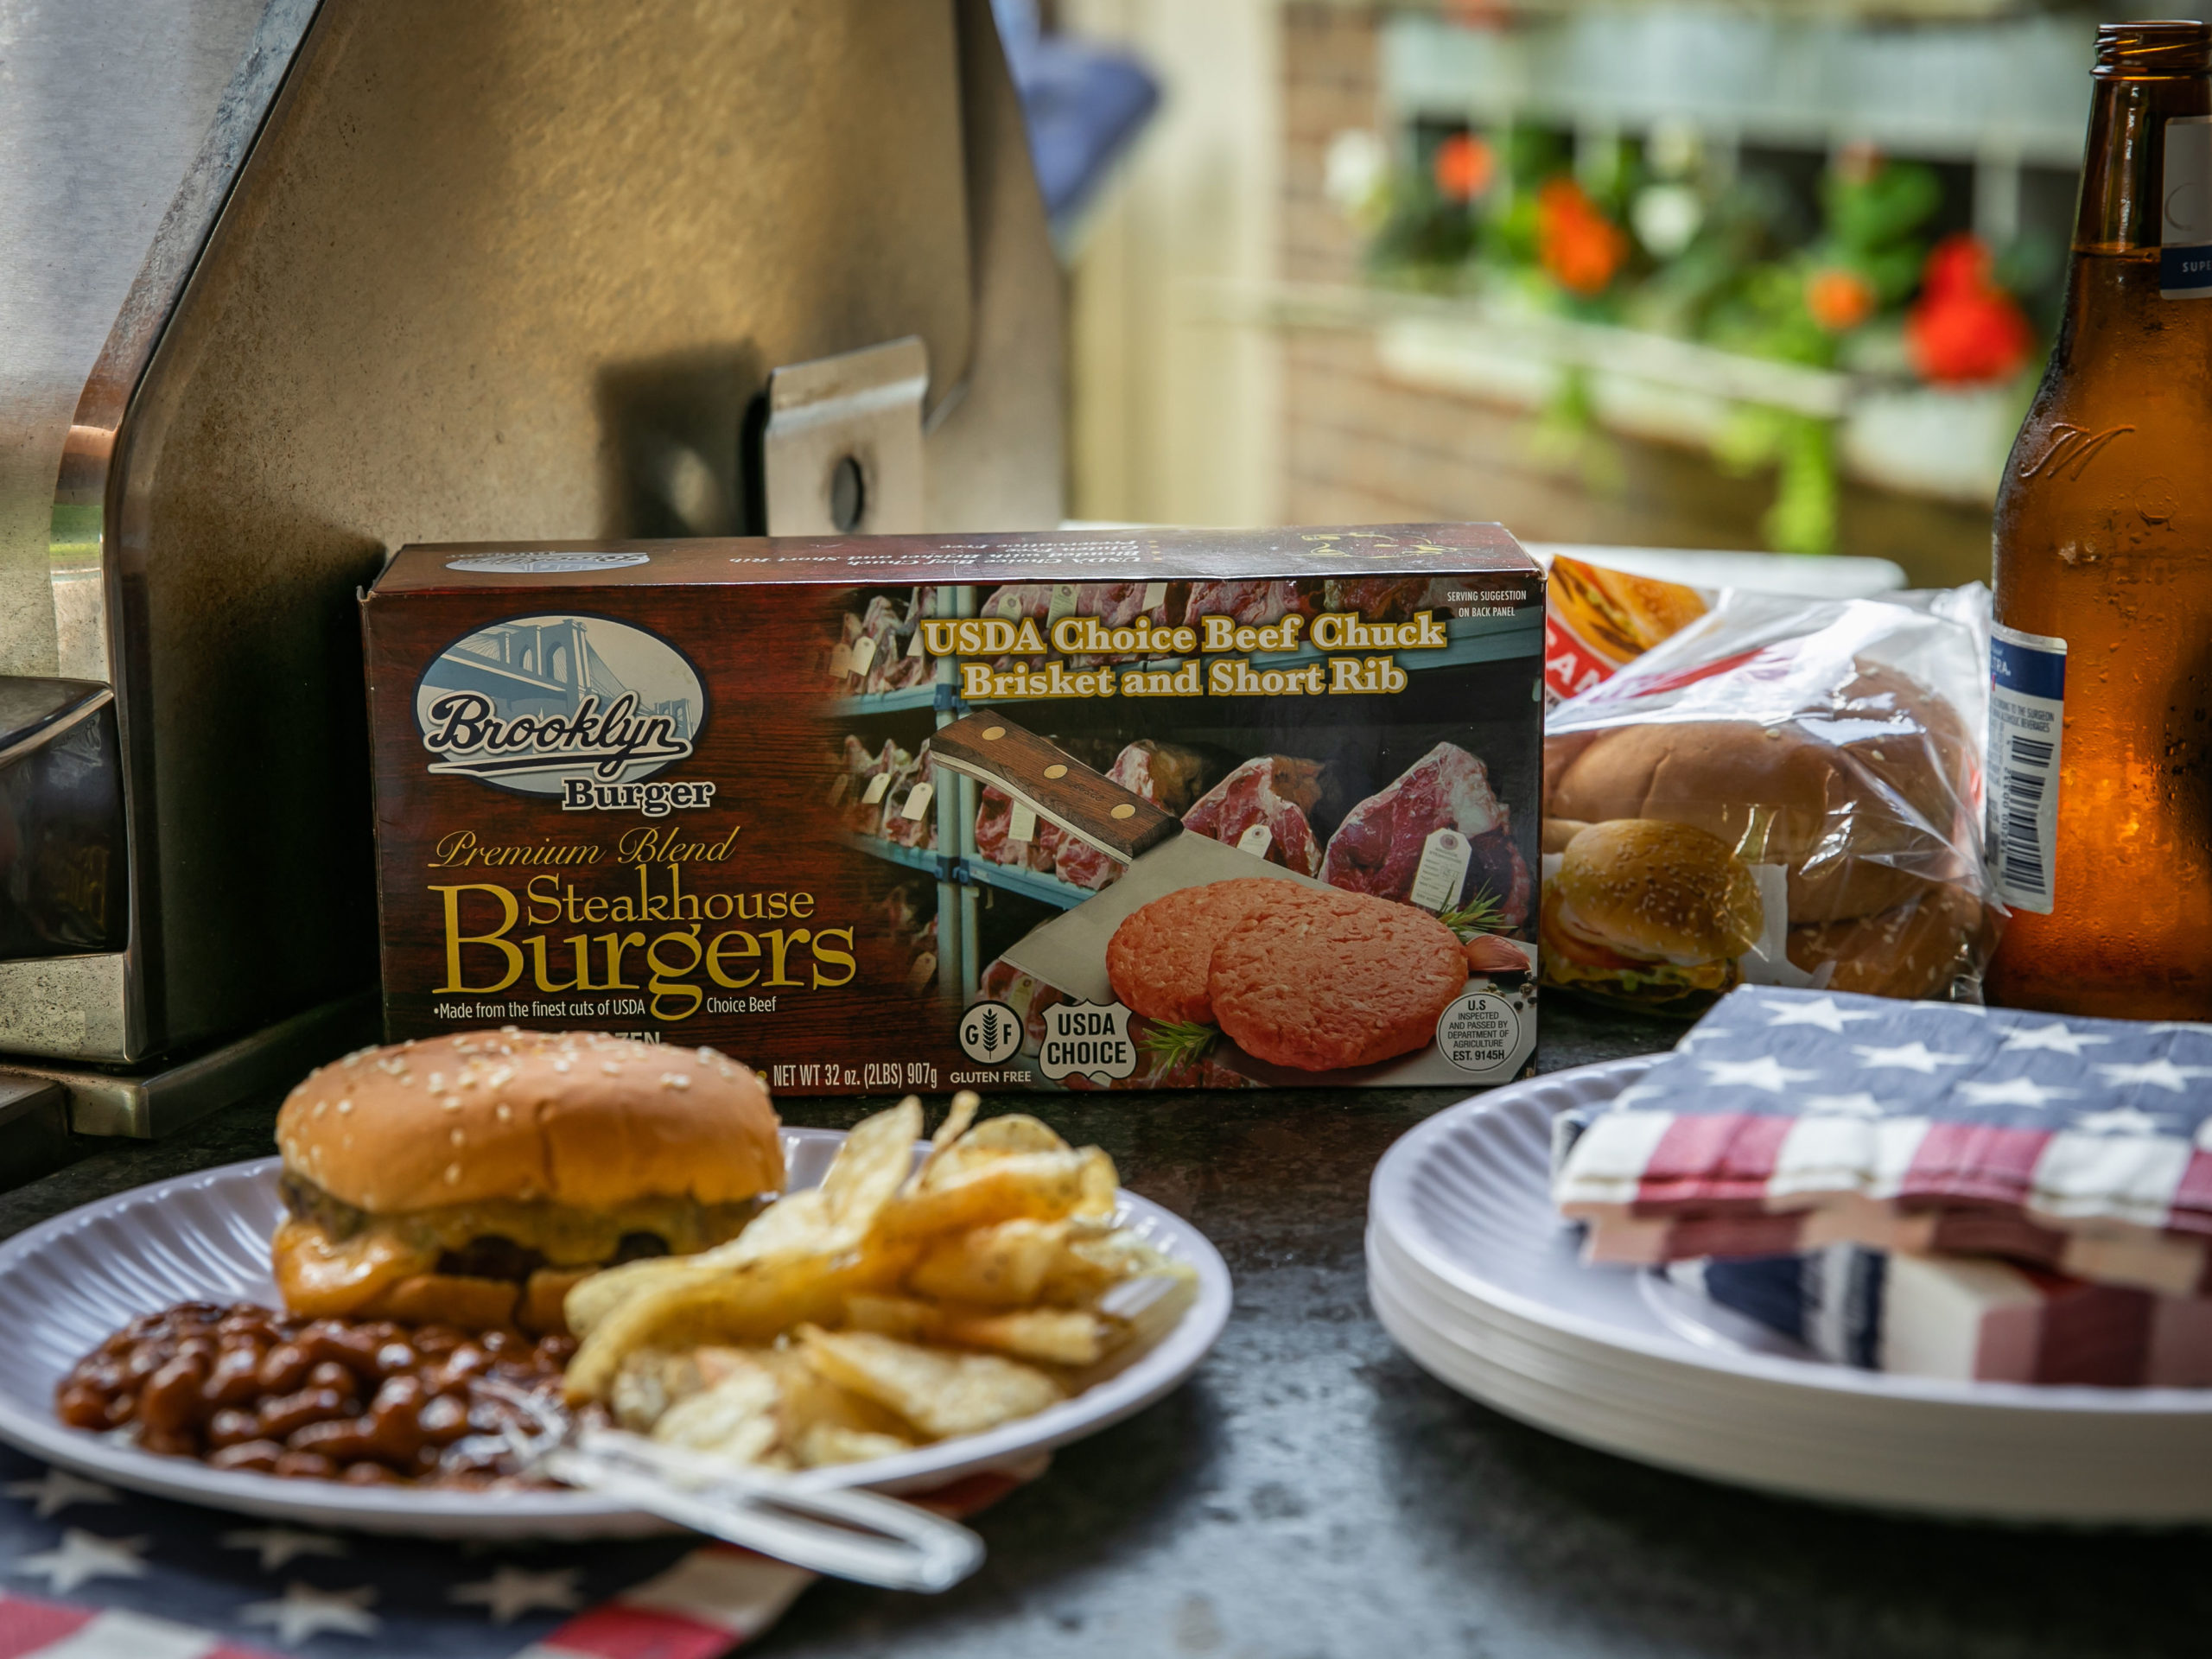 Pick Up Brooklyn Burgers Steakhouse Burgers For Your July 4th Celebration - Save Now At Publix on I Heart Publix